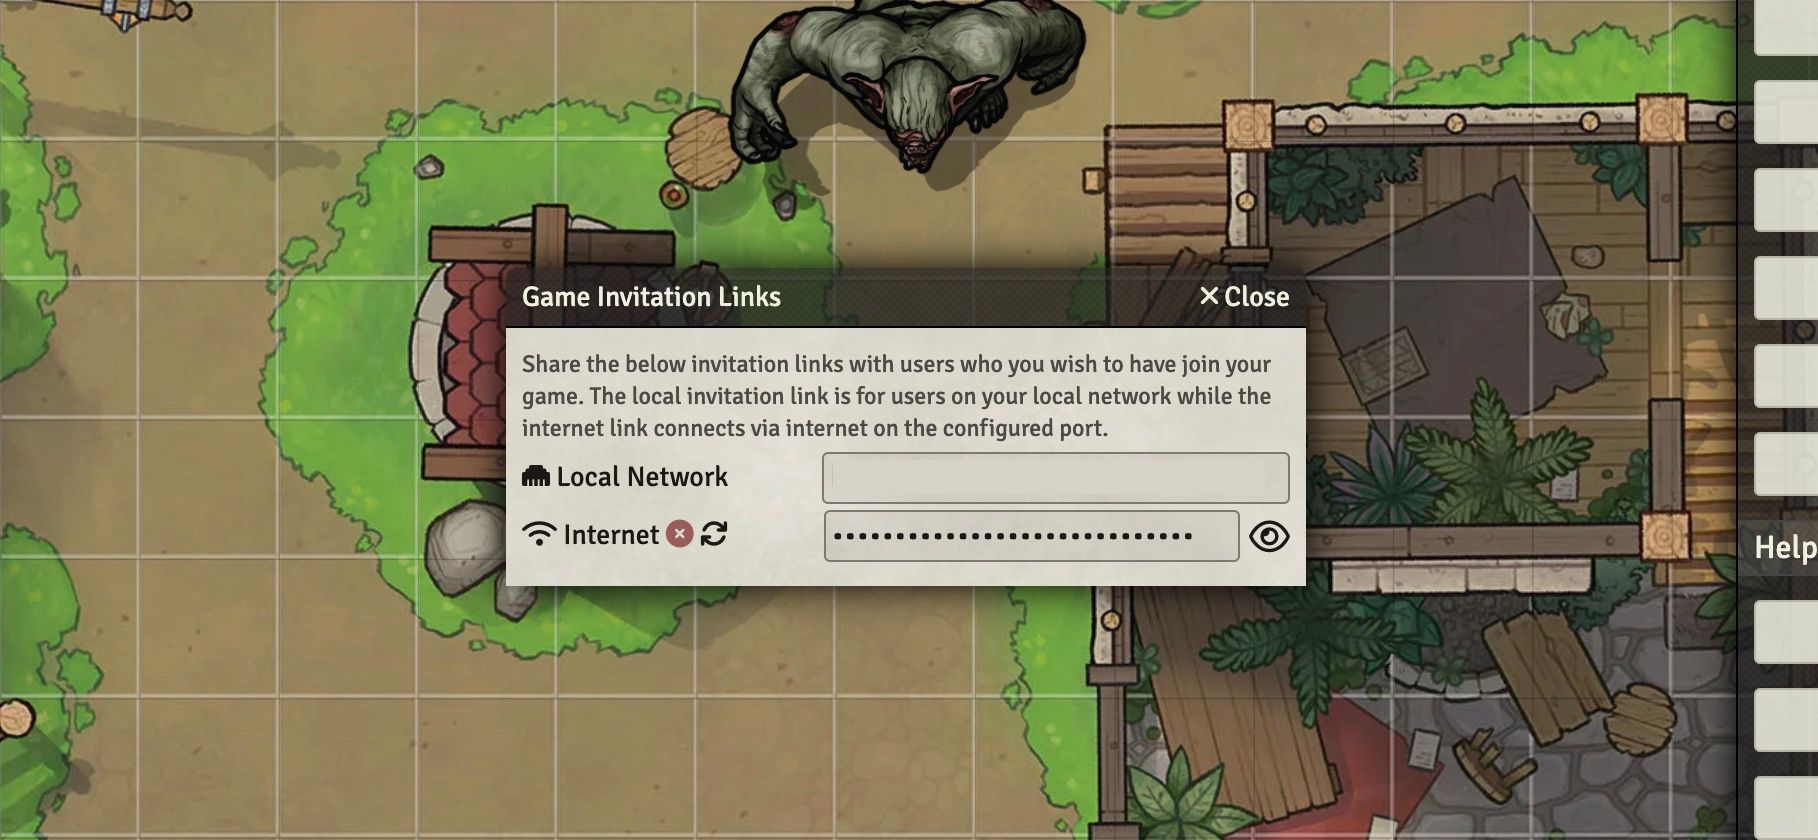 Game-sharing invitation dialogue box in FoundryVtt